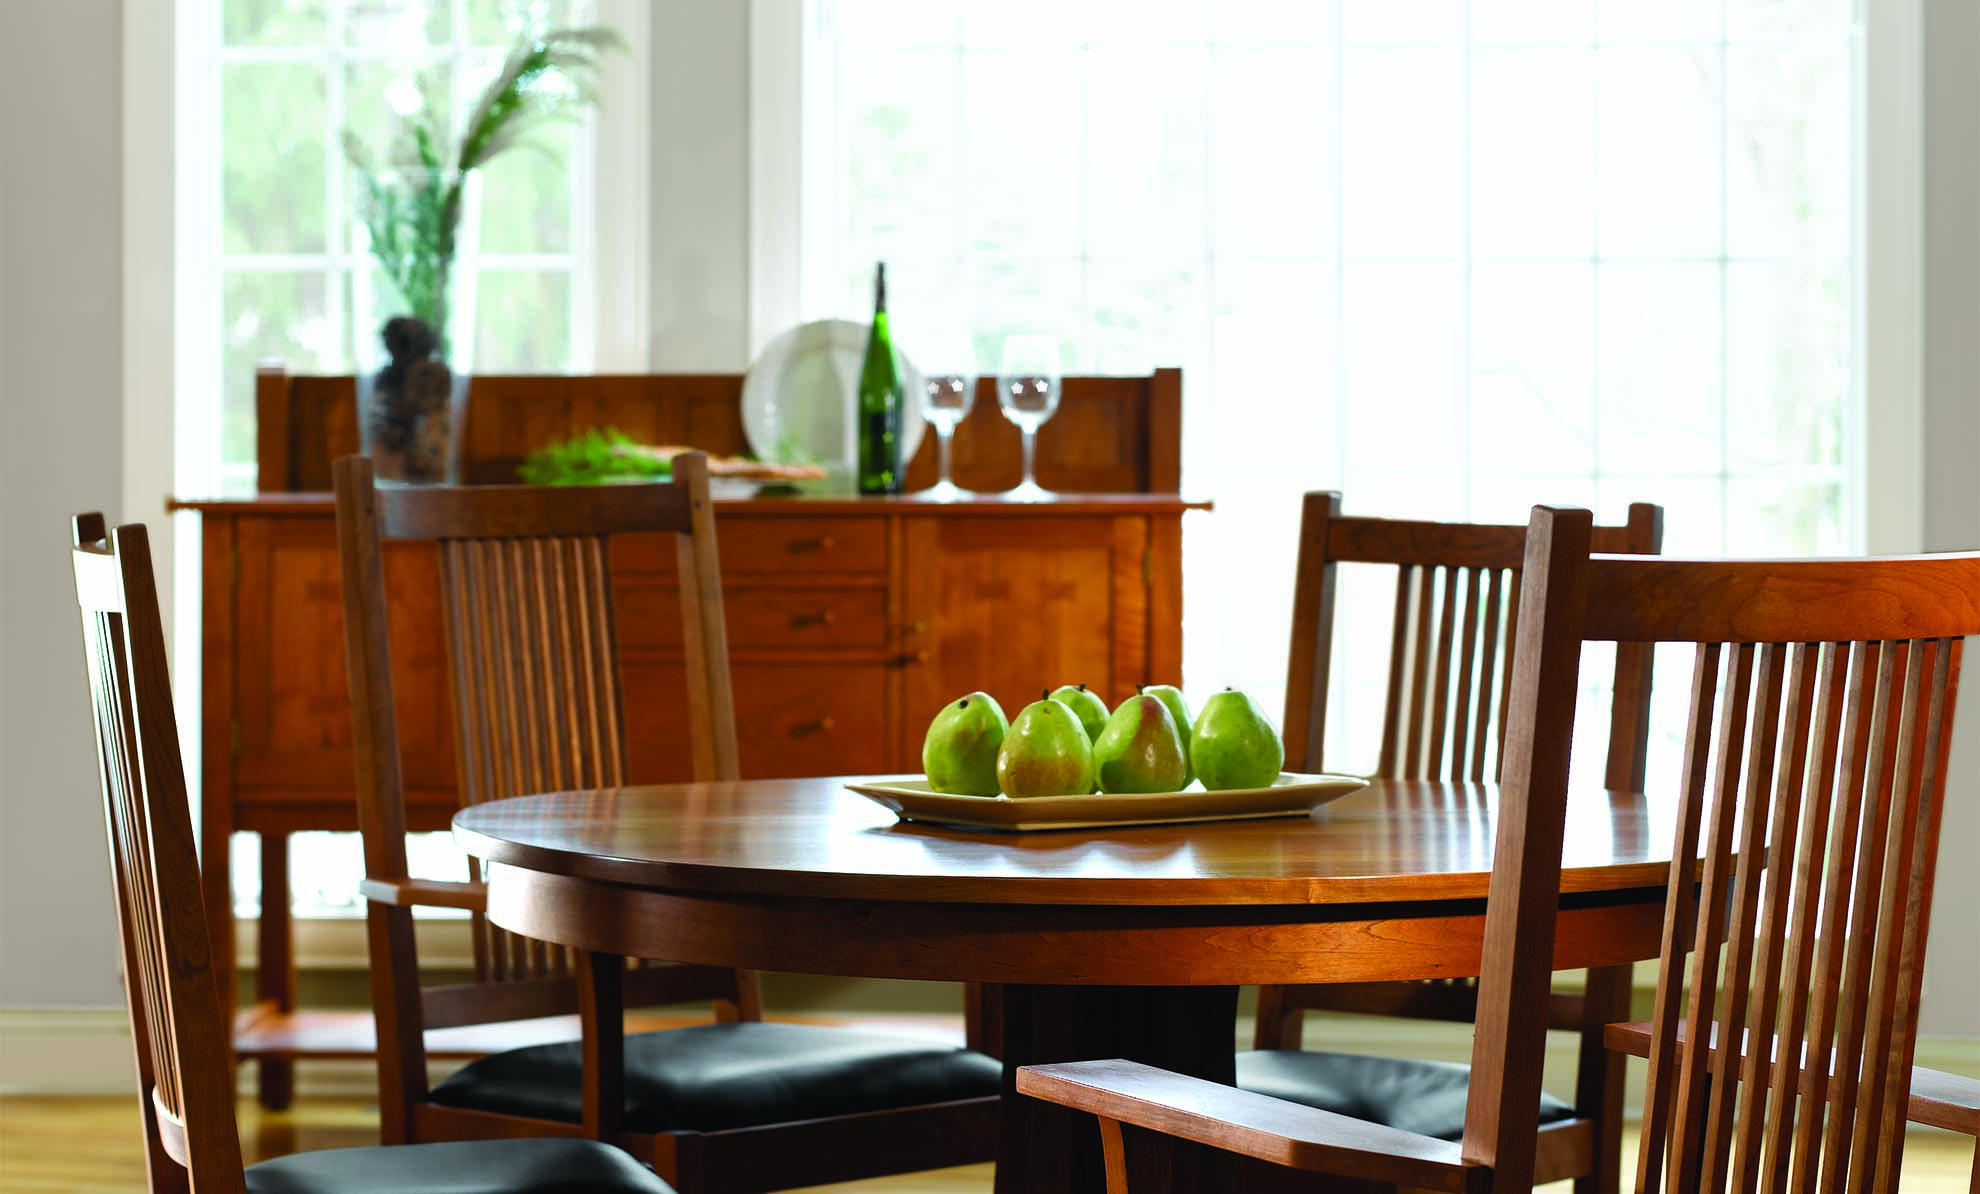 Stickley Mission Style Furniture - Gustav stickley furniture is the ...